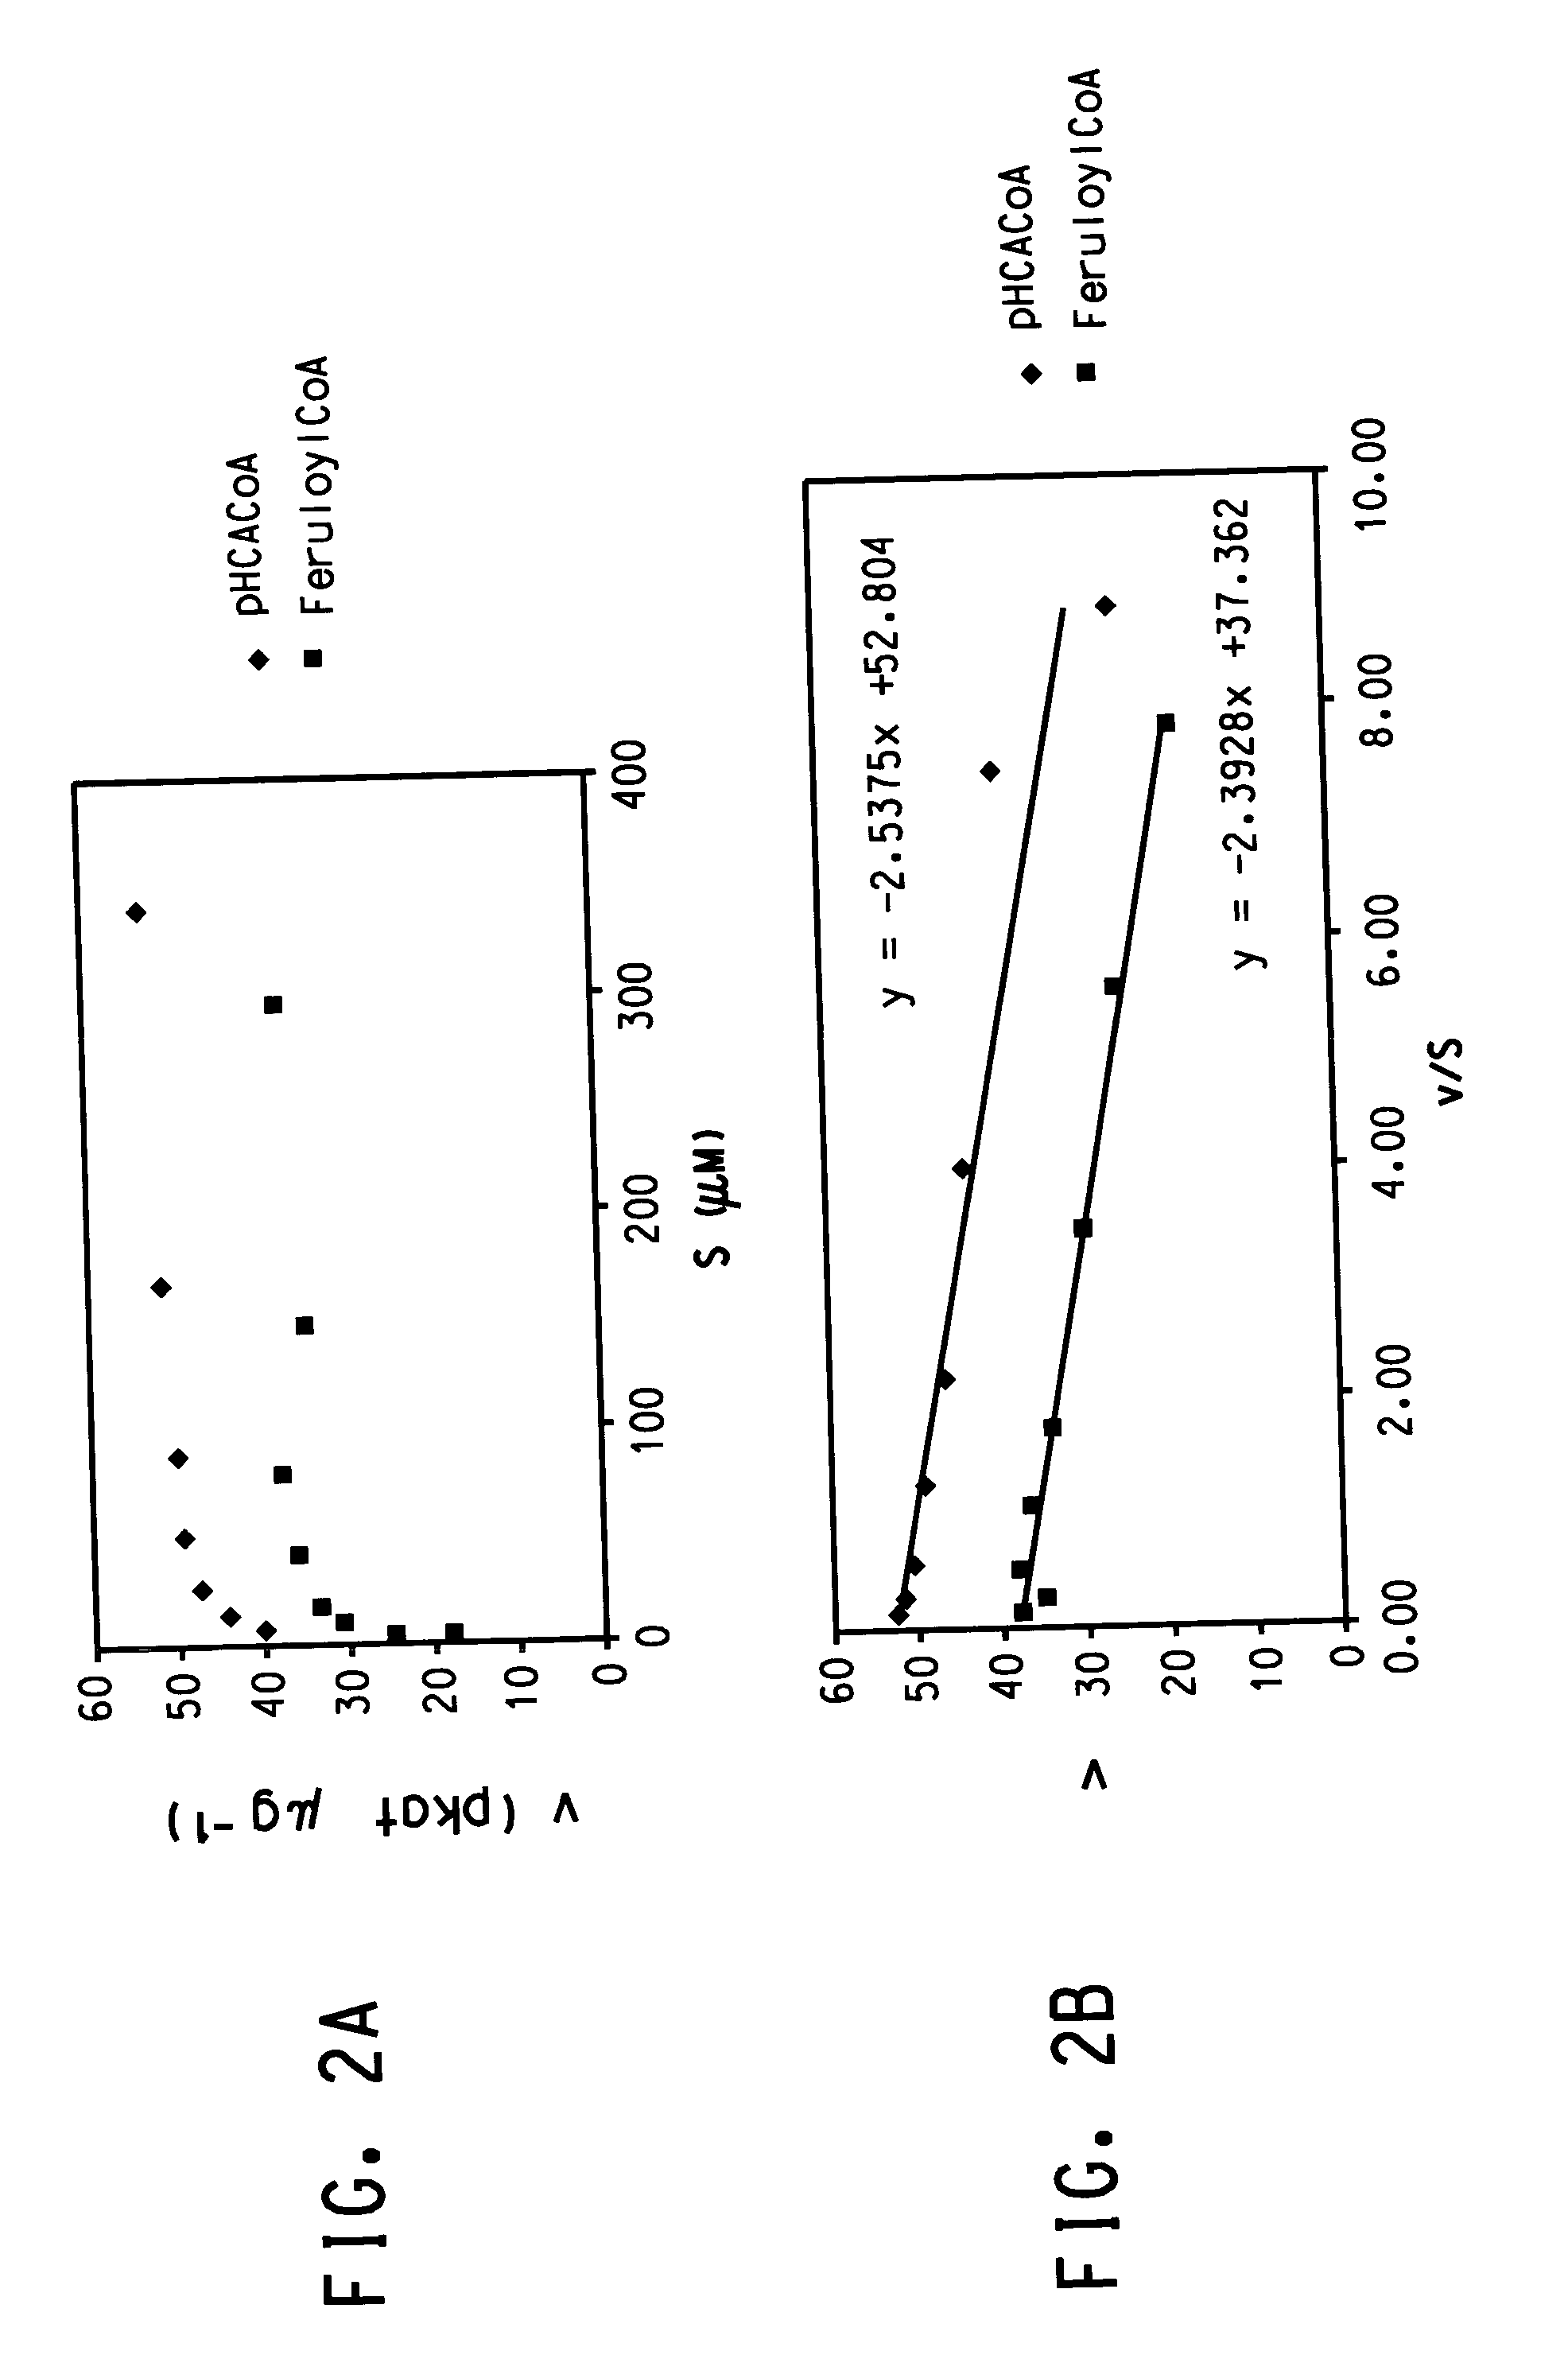 Method to produce para-hydroxybenzoic acid in the stem tissue of green plants by using a tissue-specific promoter